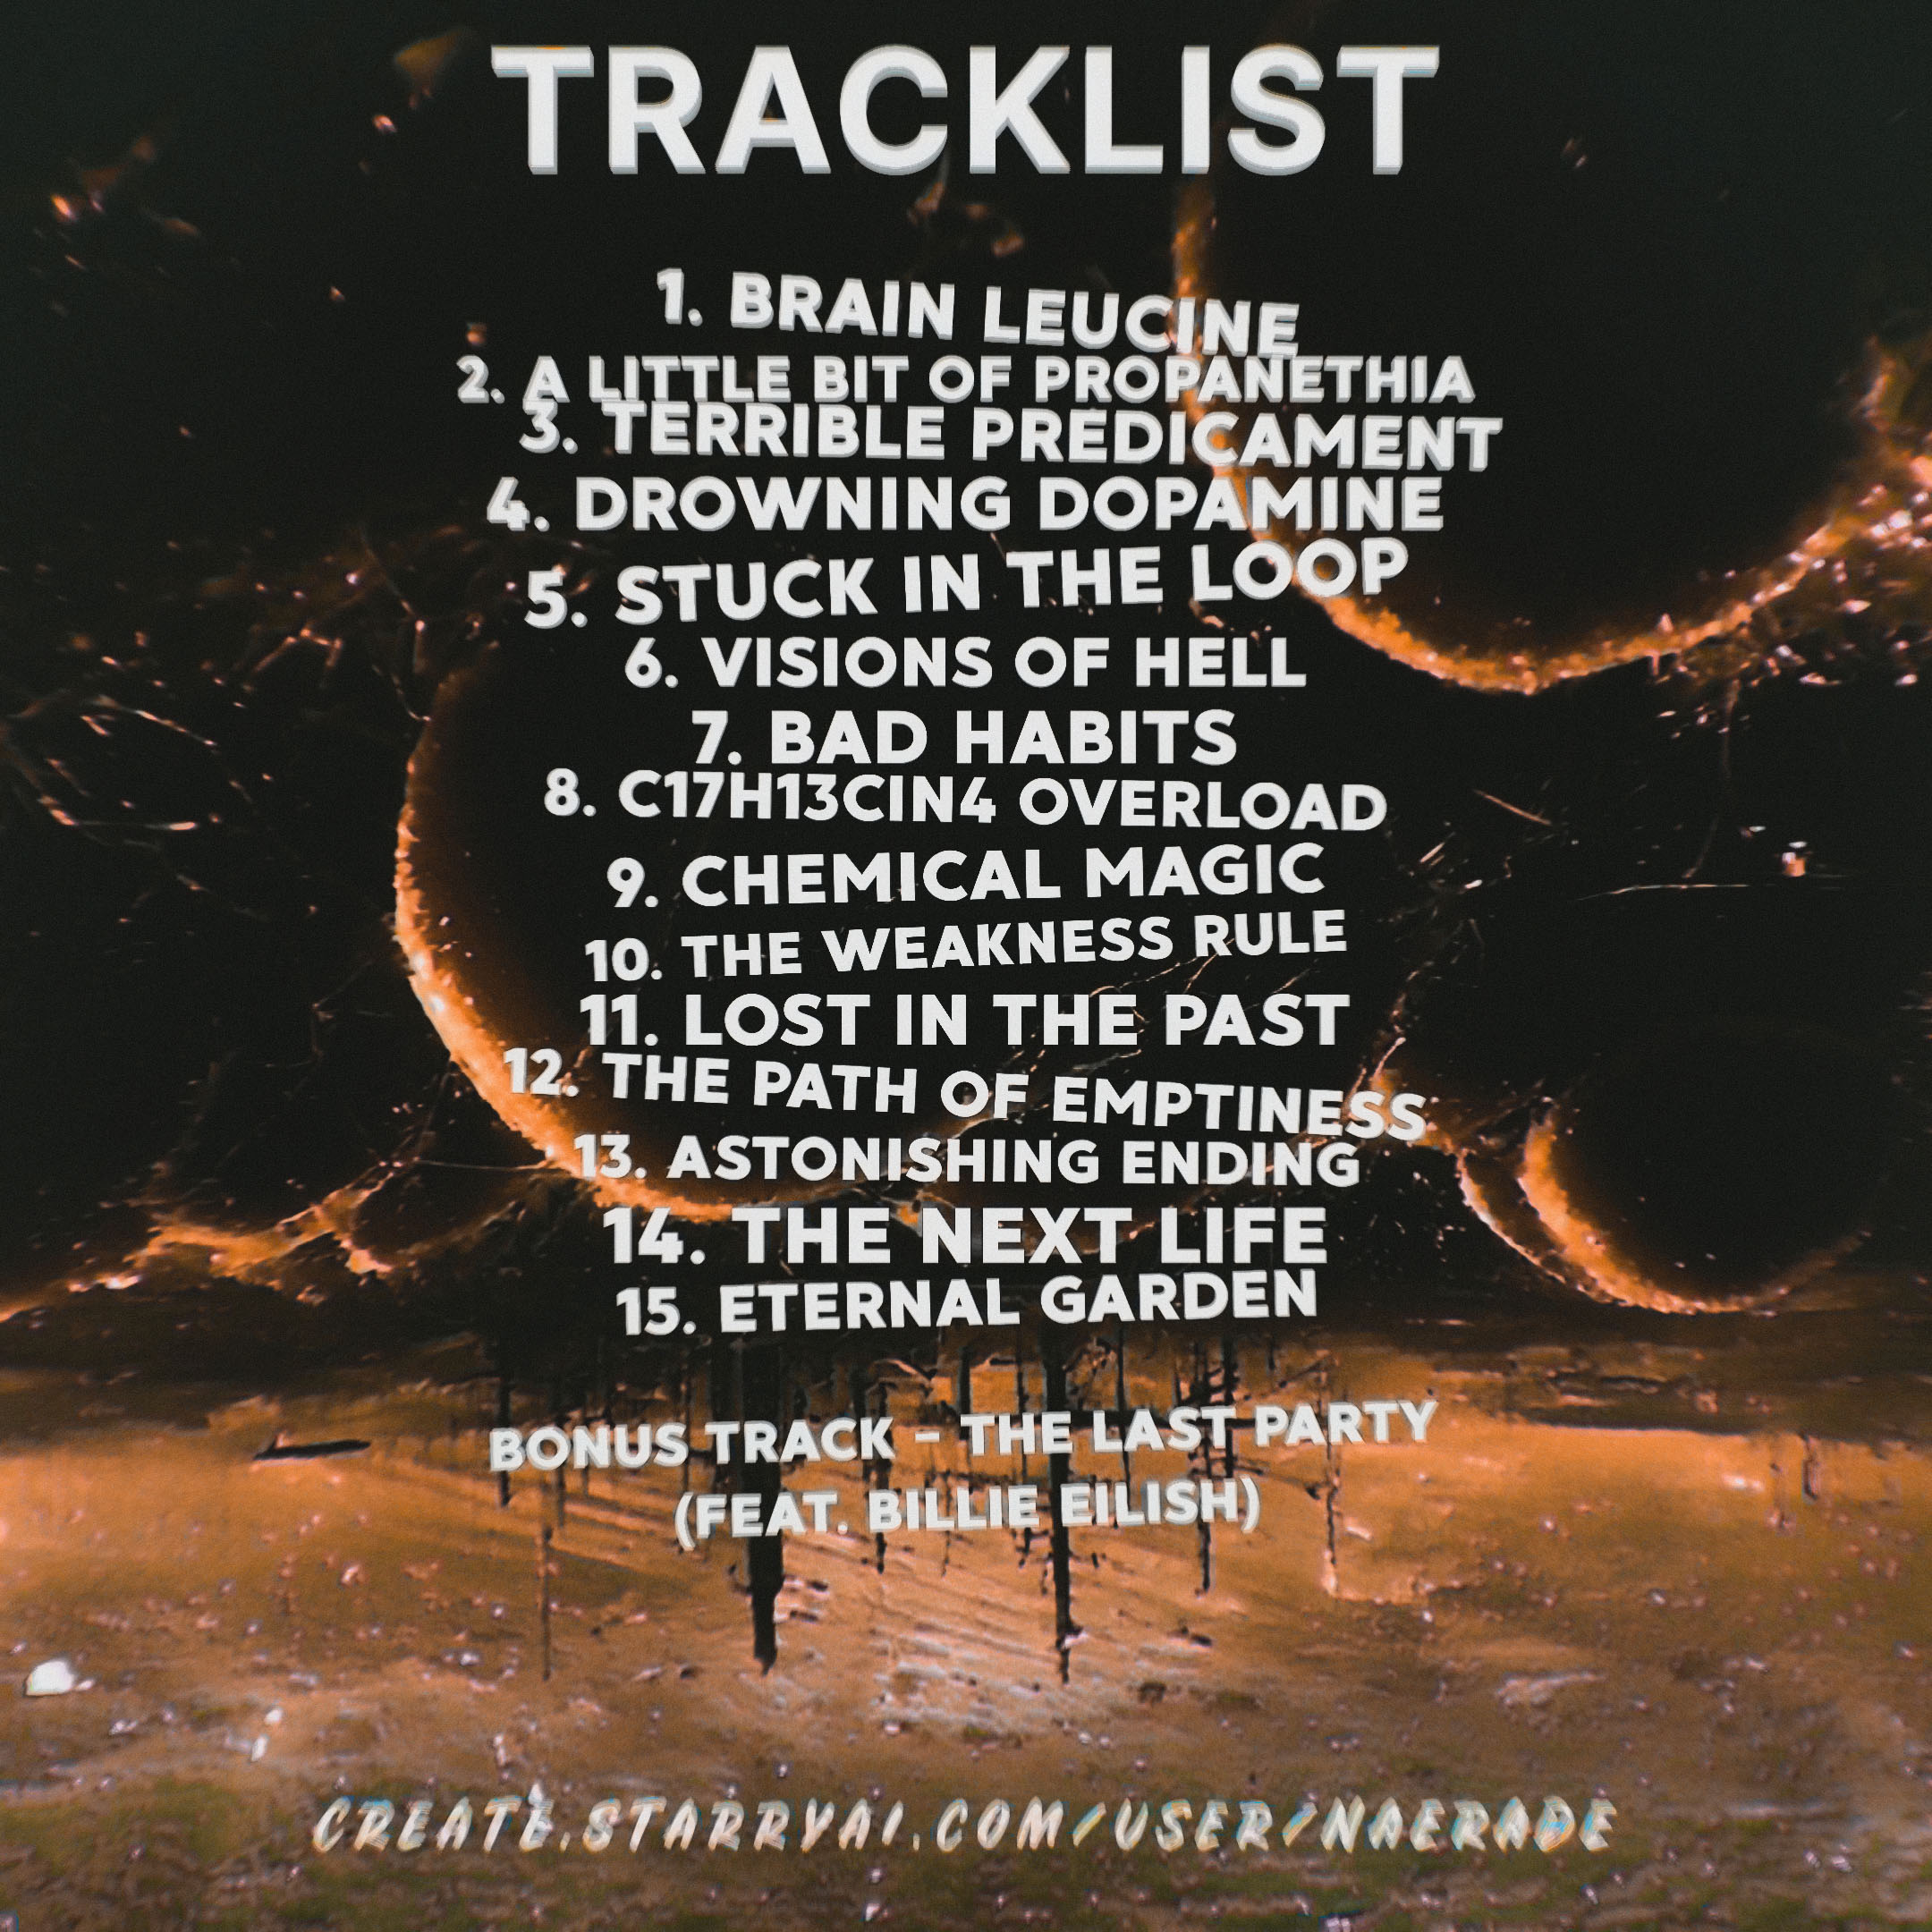 Tracklist cover design of an electro band